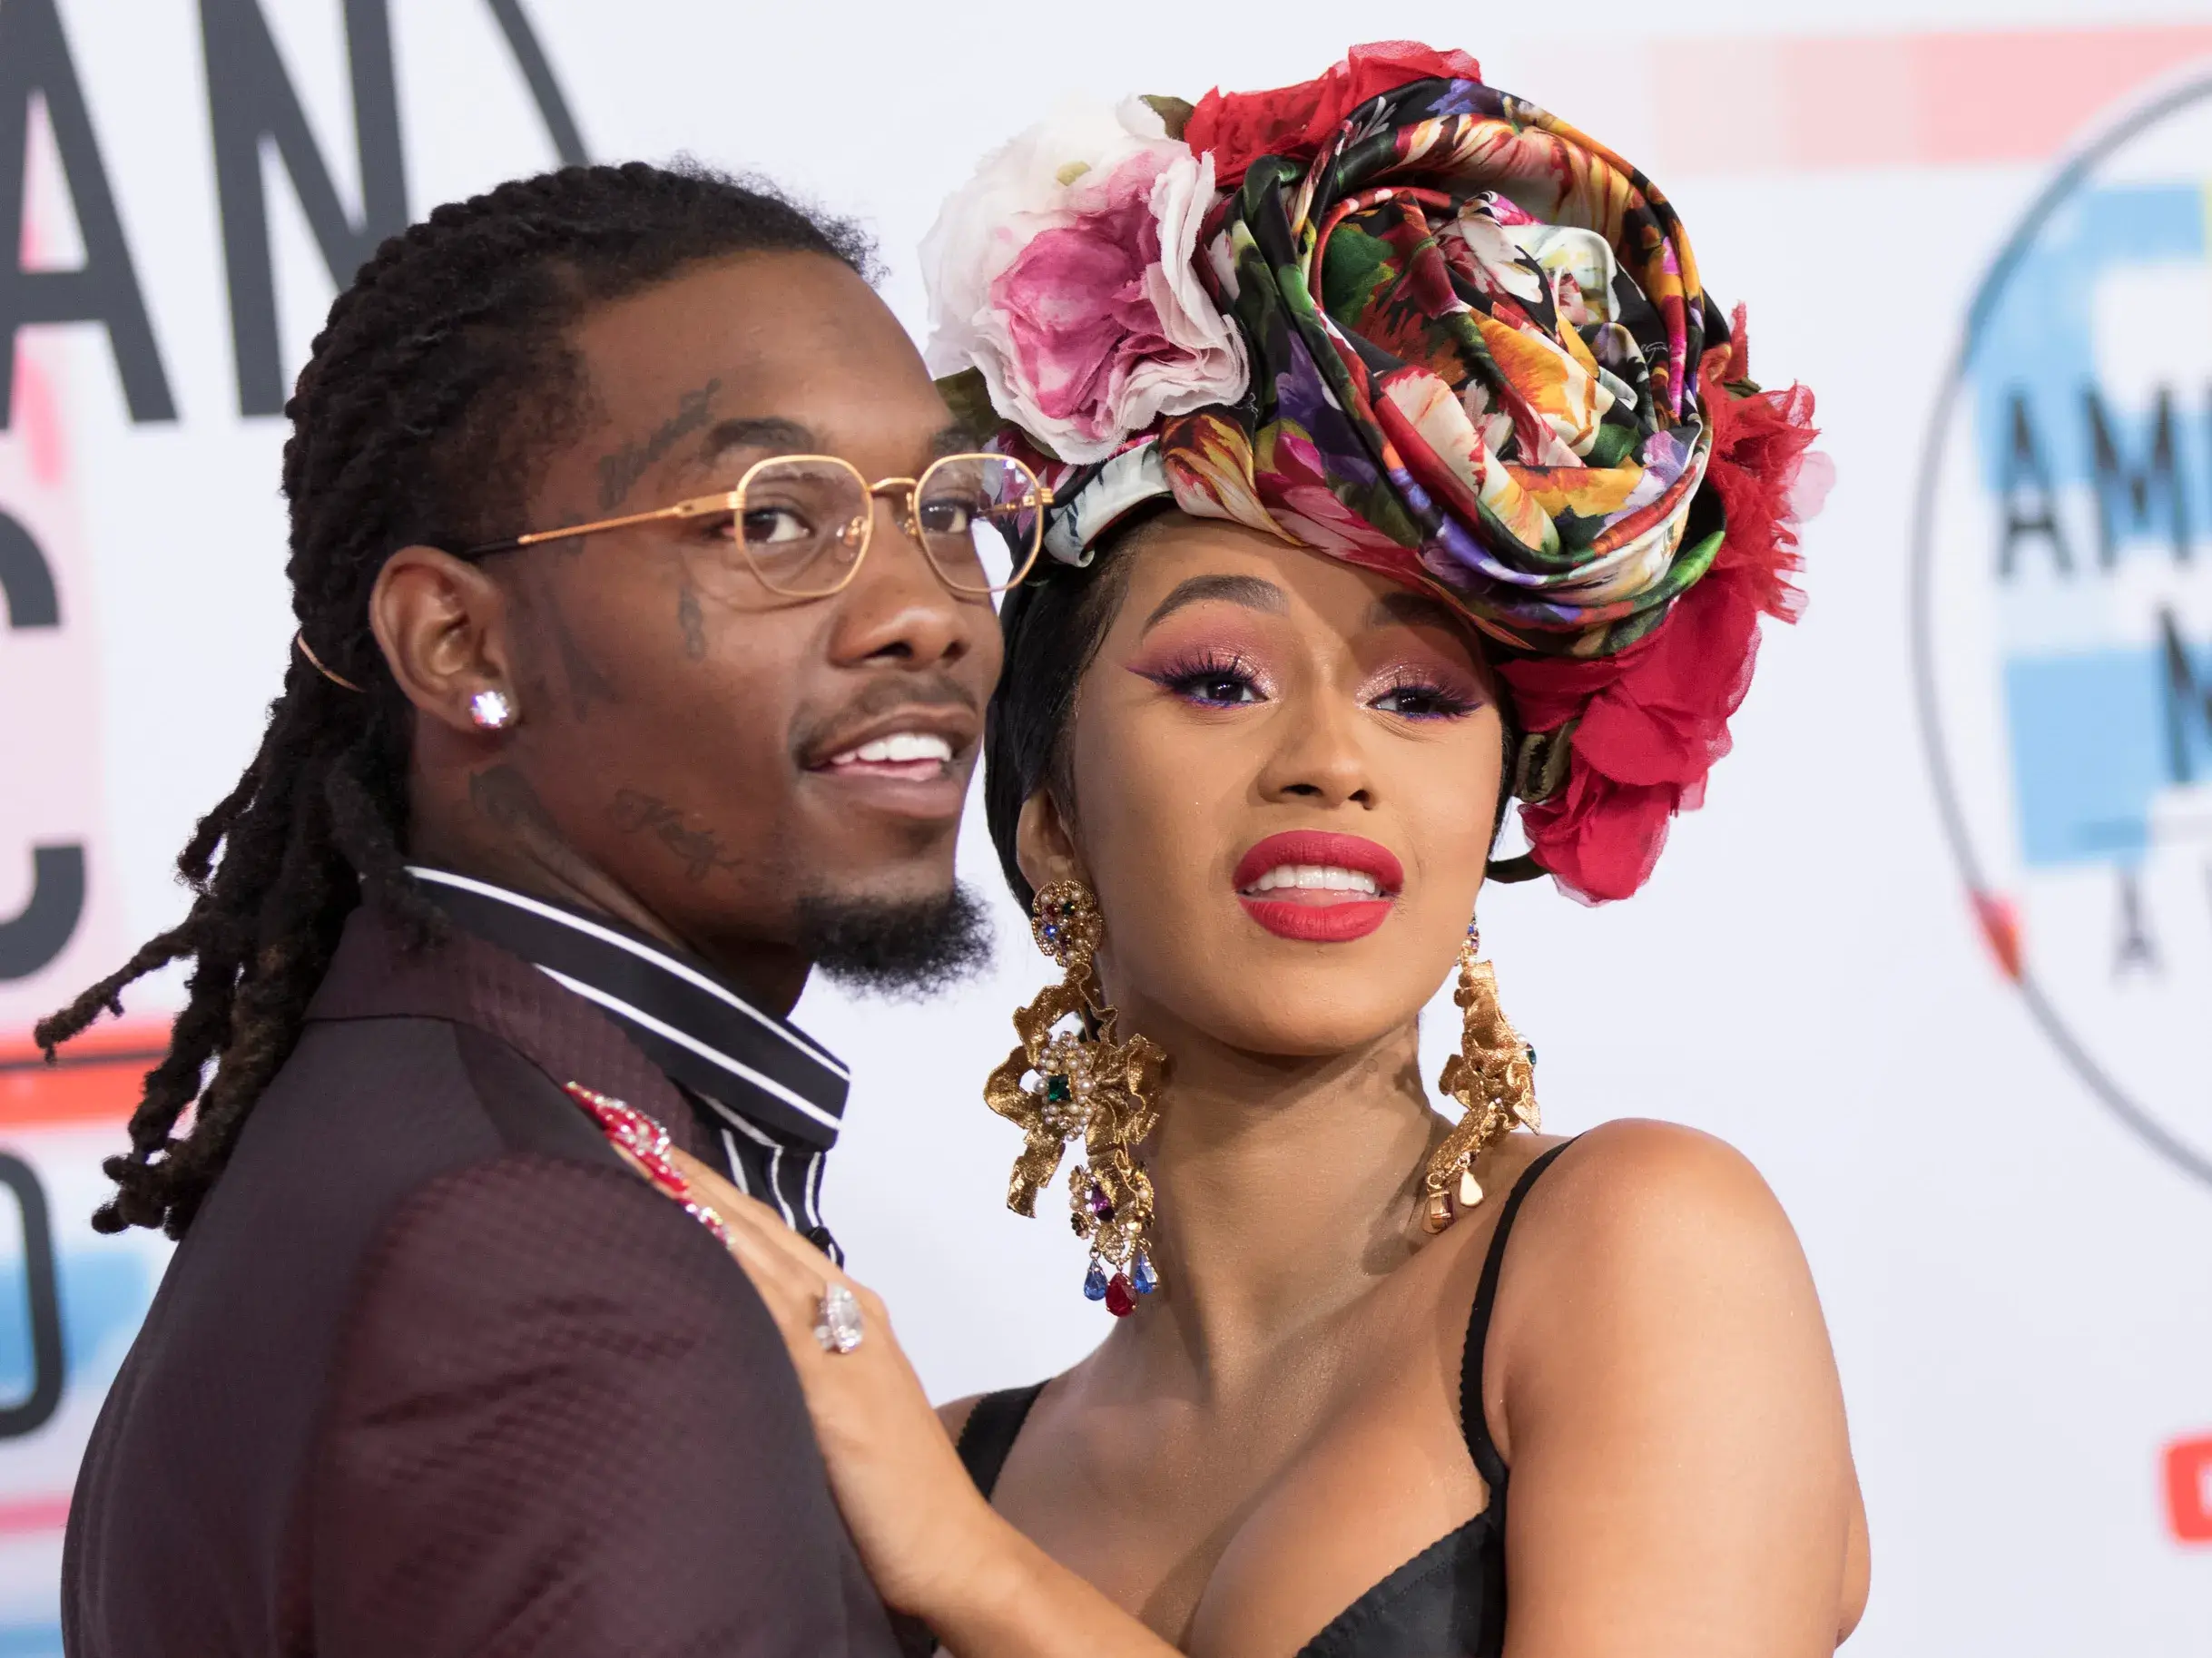 Cardi B with her husband Offset